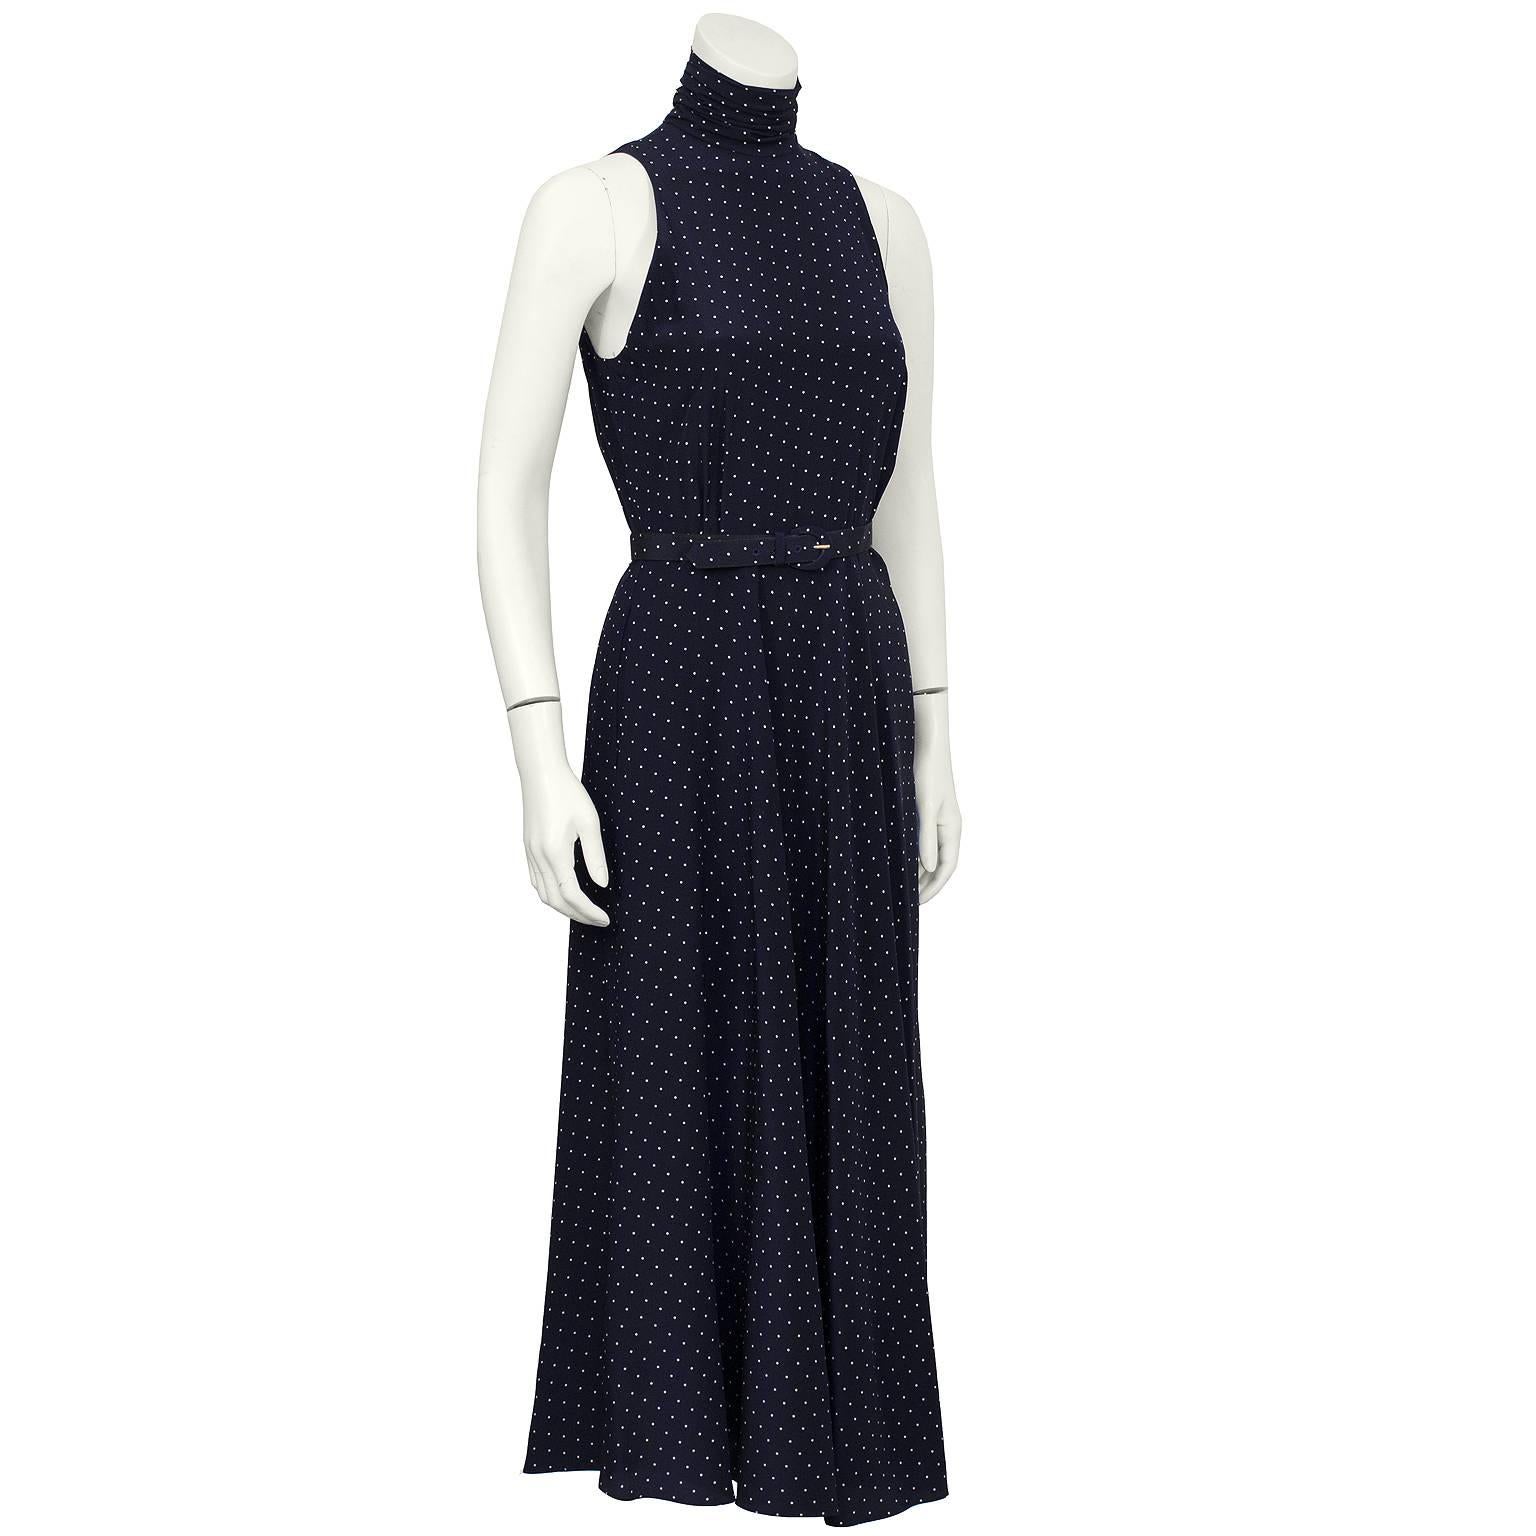 Silk navy polkadot belted maxi dress from the 1970s. The dress features a folded collar that fastens at the back with buttons and a matching belt to be worn at the natural waist. Finished with inseam pockets at the hips. In excellent condition. Fits